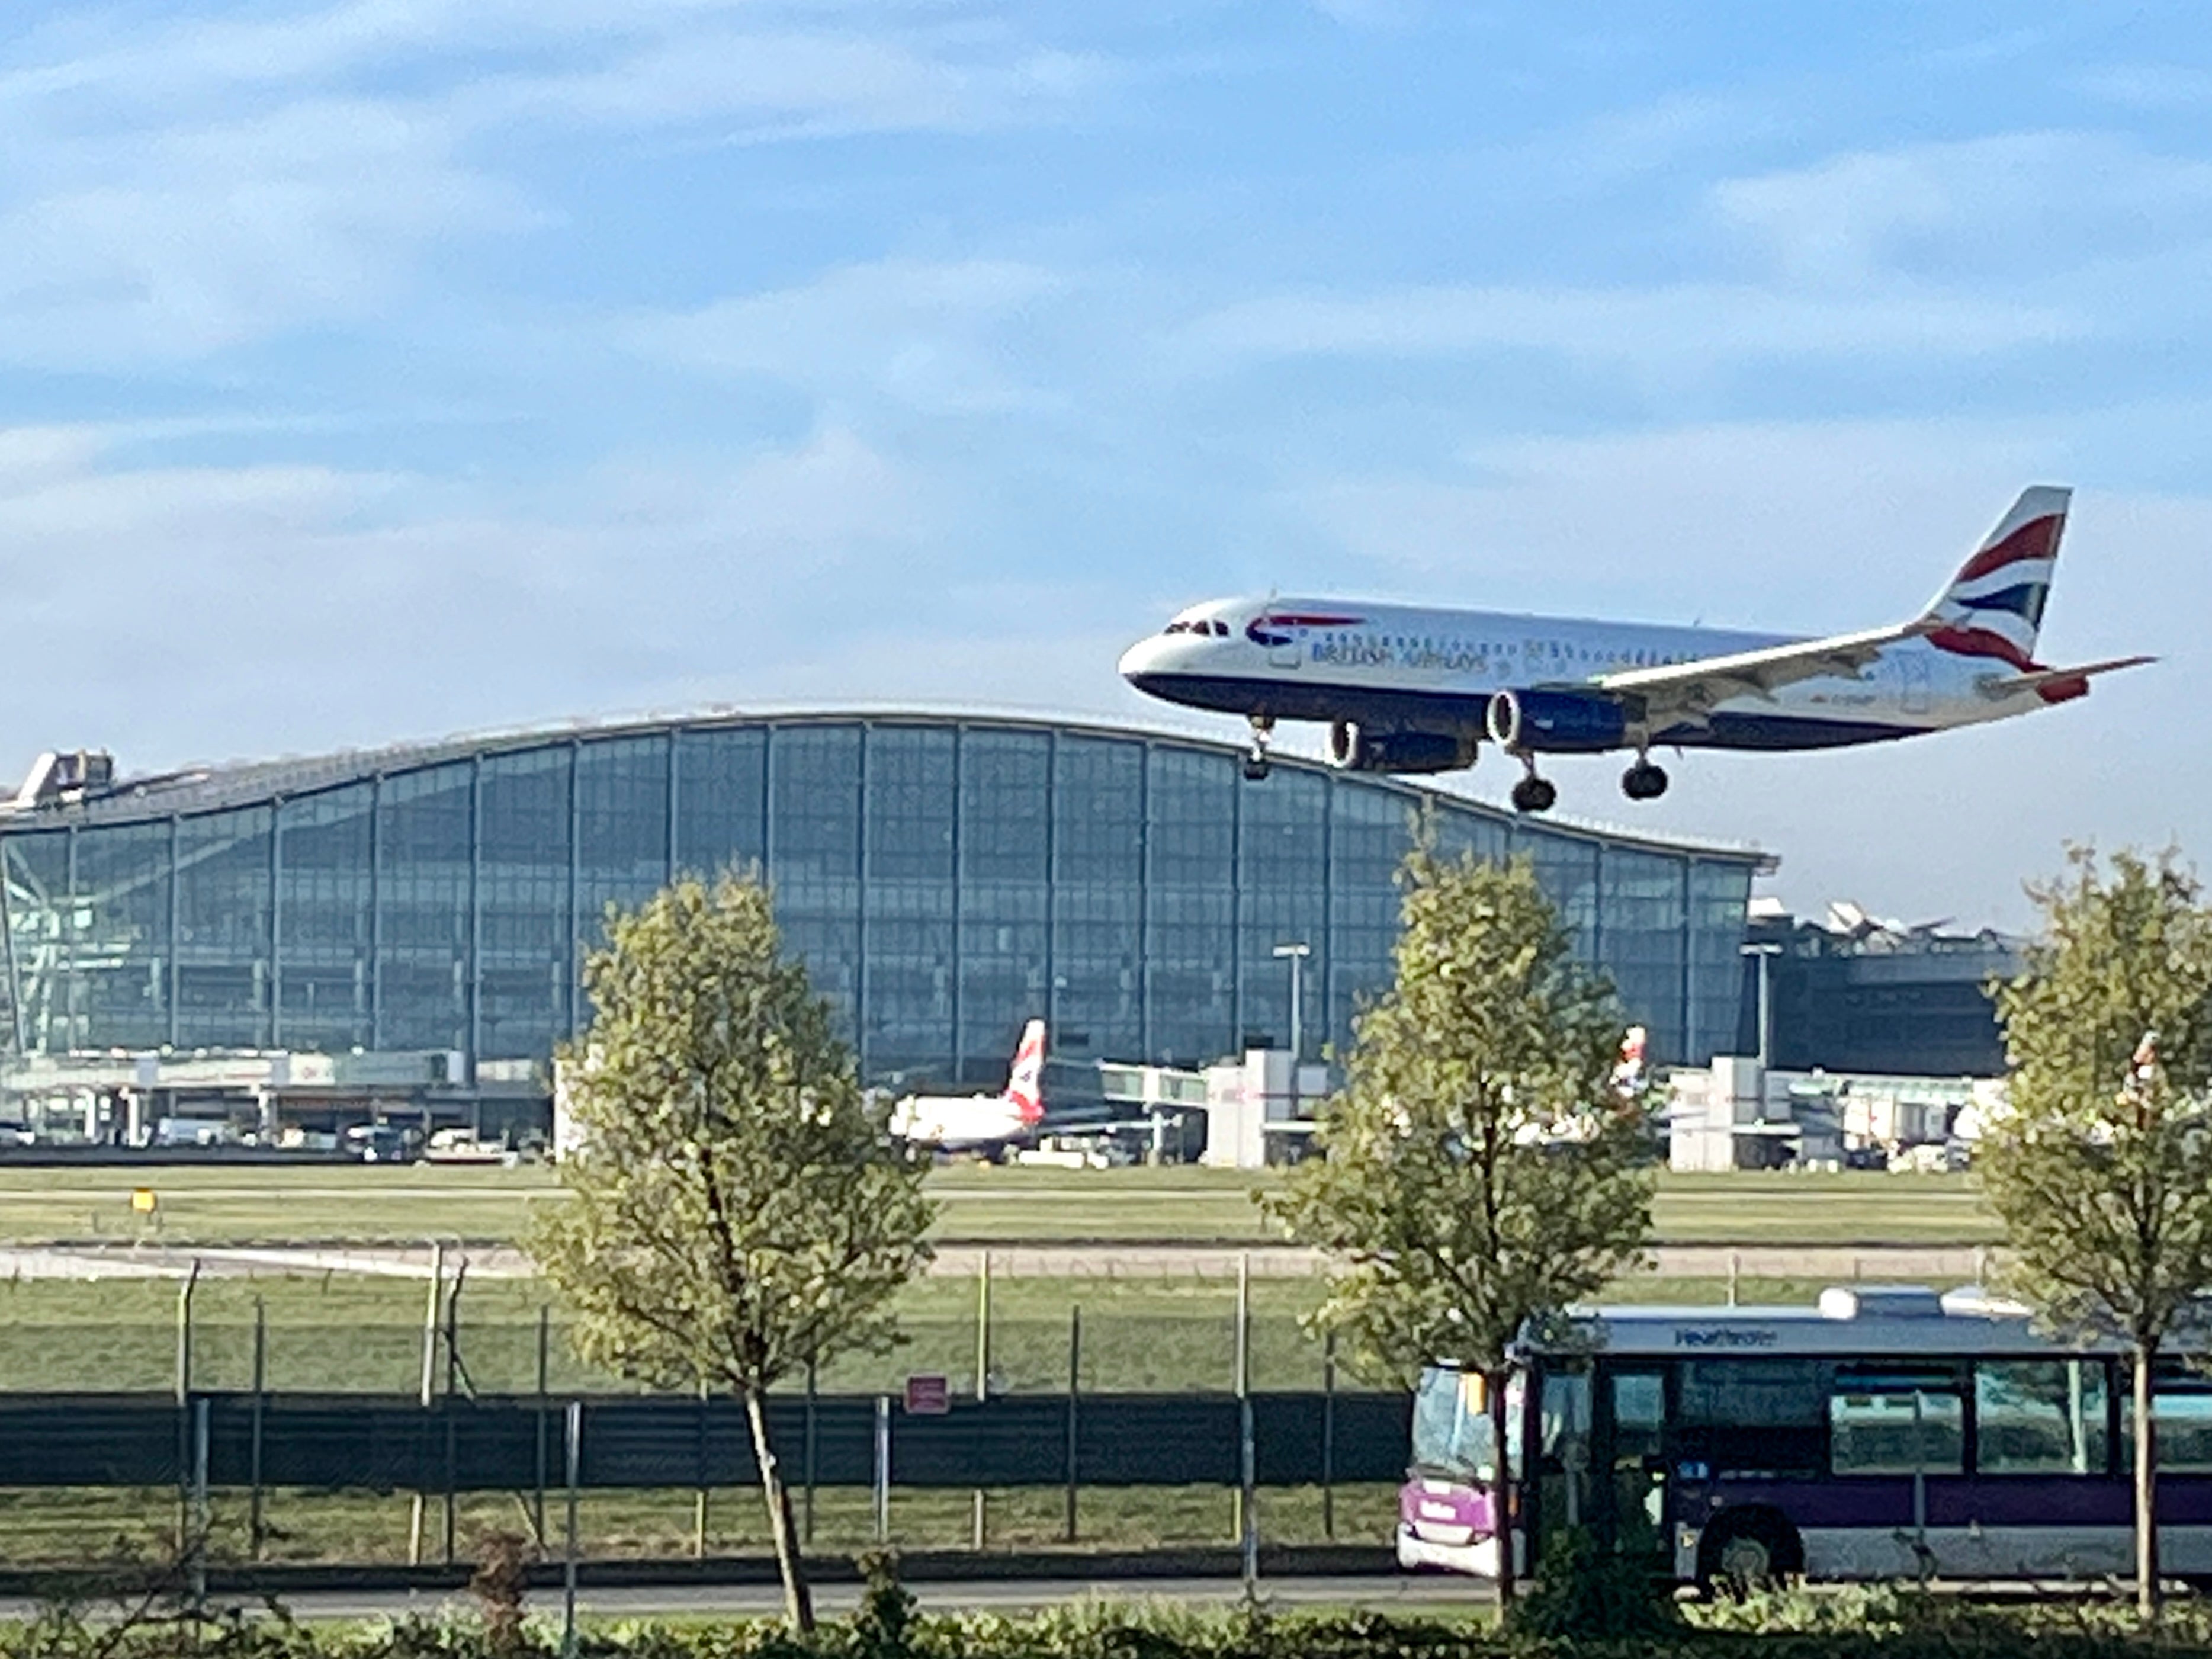 Under pressure: British Airways Airbus A320 landing at Heathrow Airport in front of Terminal 5. BA has made many cancellations of Saturday’s flights